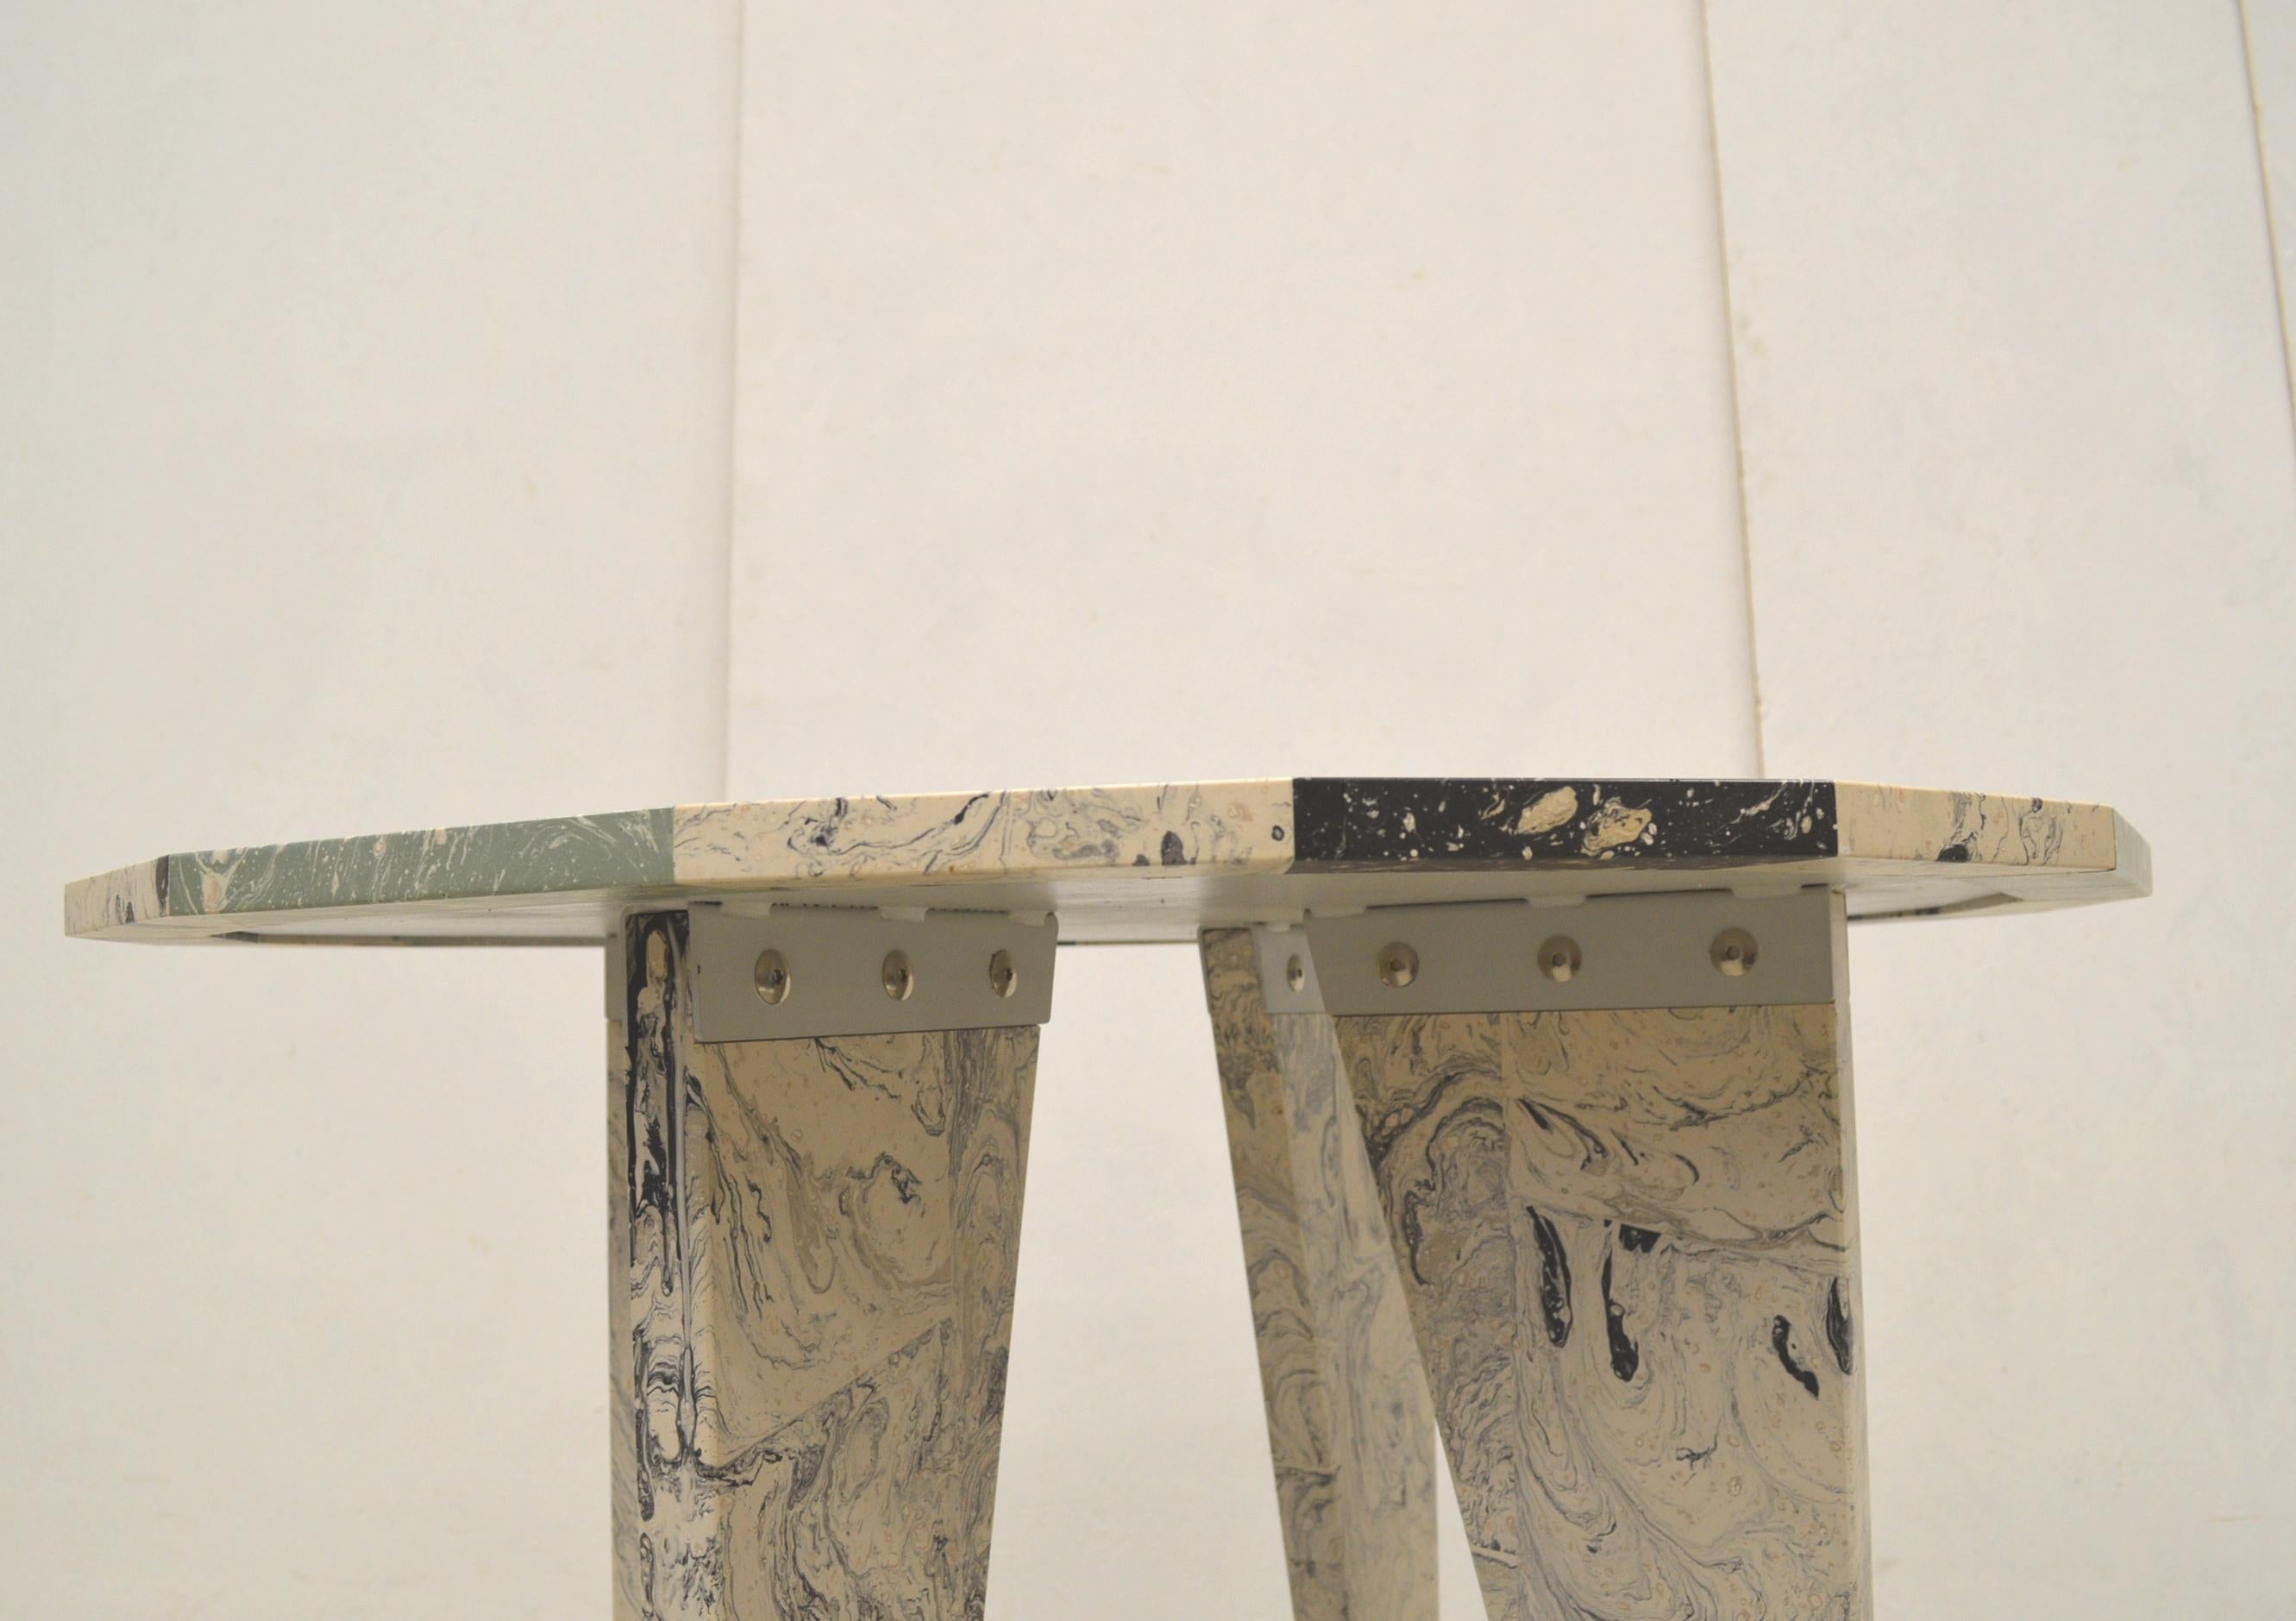 Hand-Crafted Contemporary 1 of a Kind Jesmonite Centre Table by Hilda Hellström For Sale